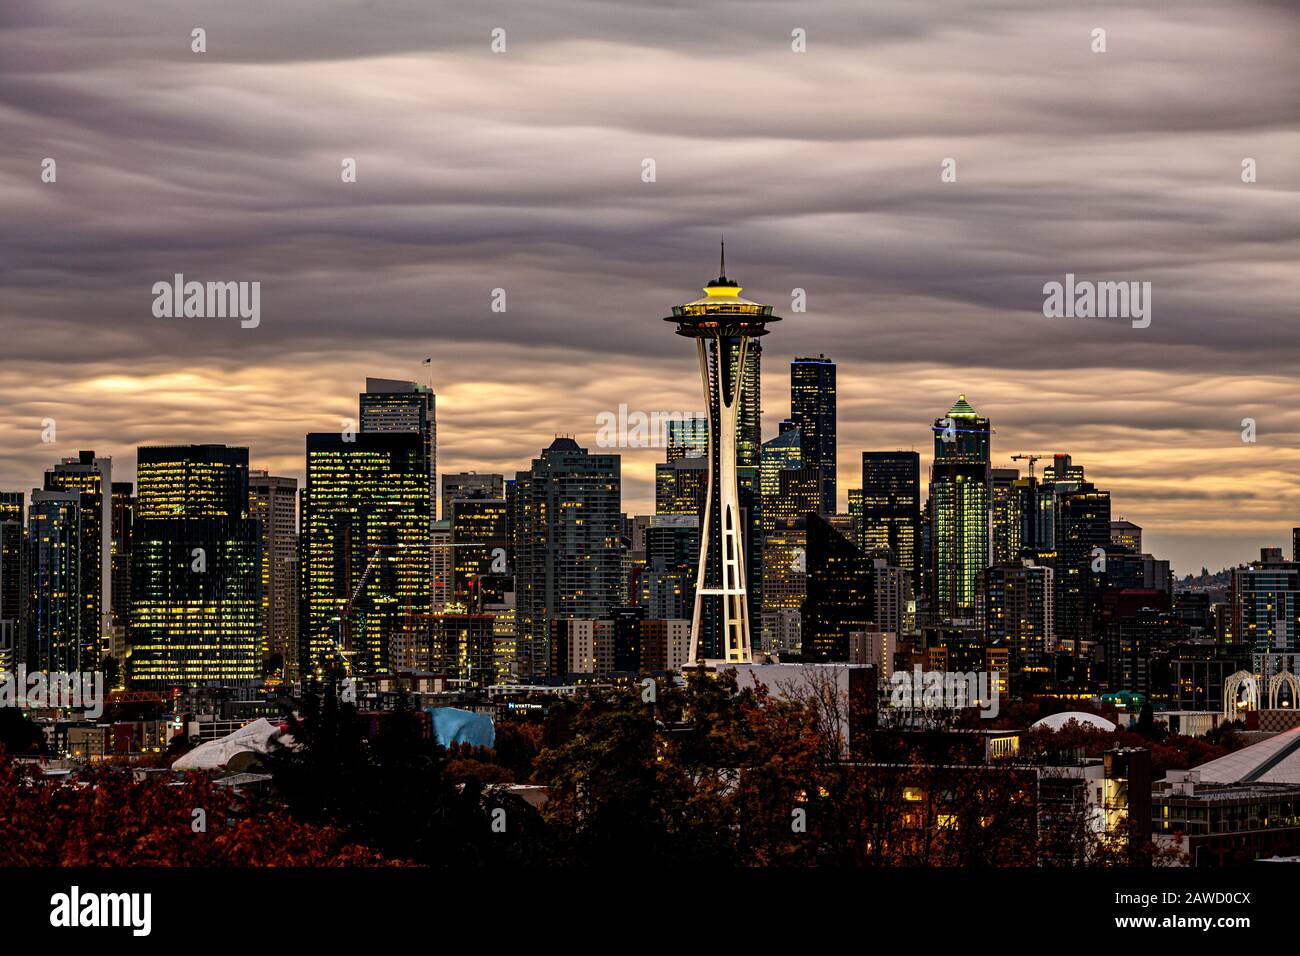 WA17384-00...WASHINGTON - The city of Seattle with the Space Needle viewed from Kerry park on Queen Ann Hill. Stock Photo